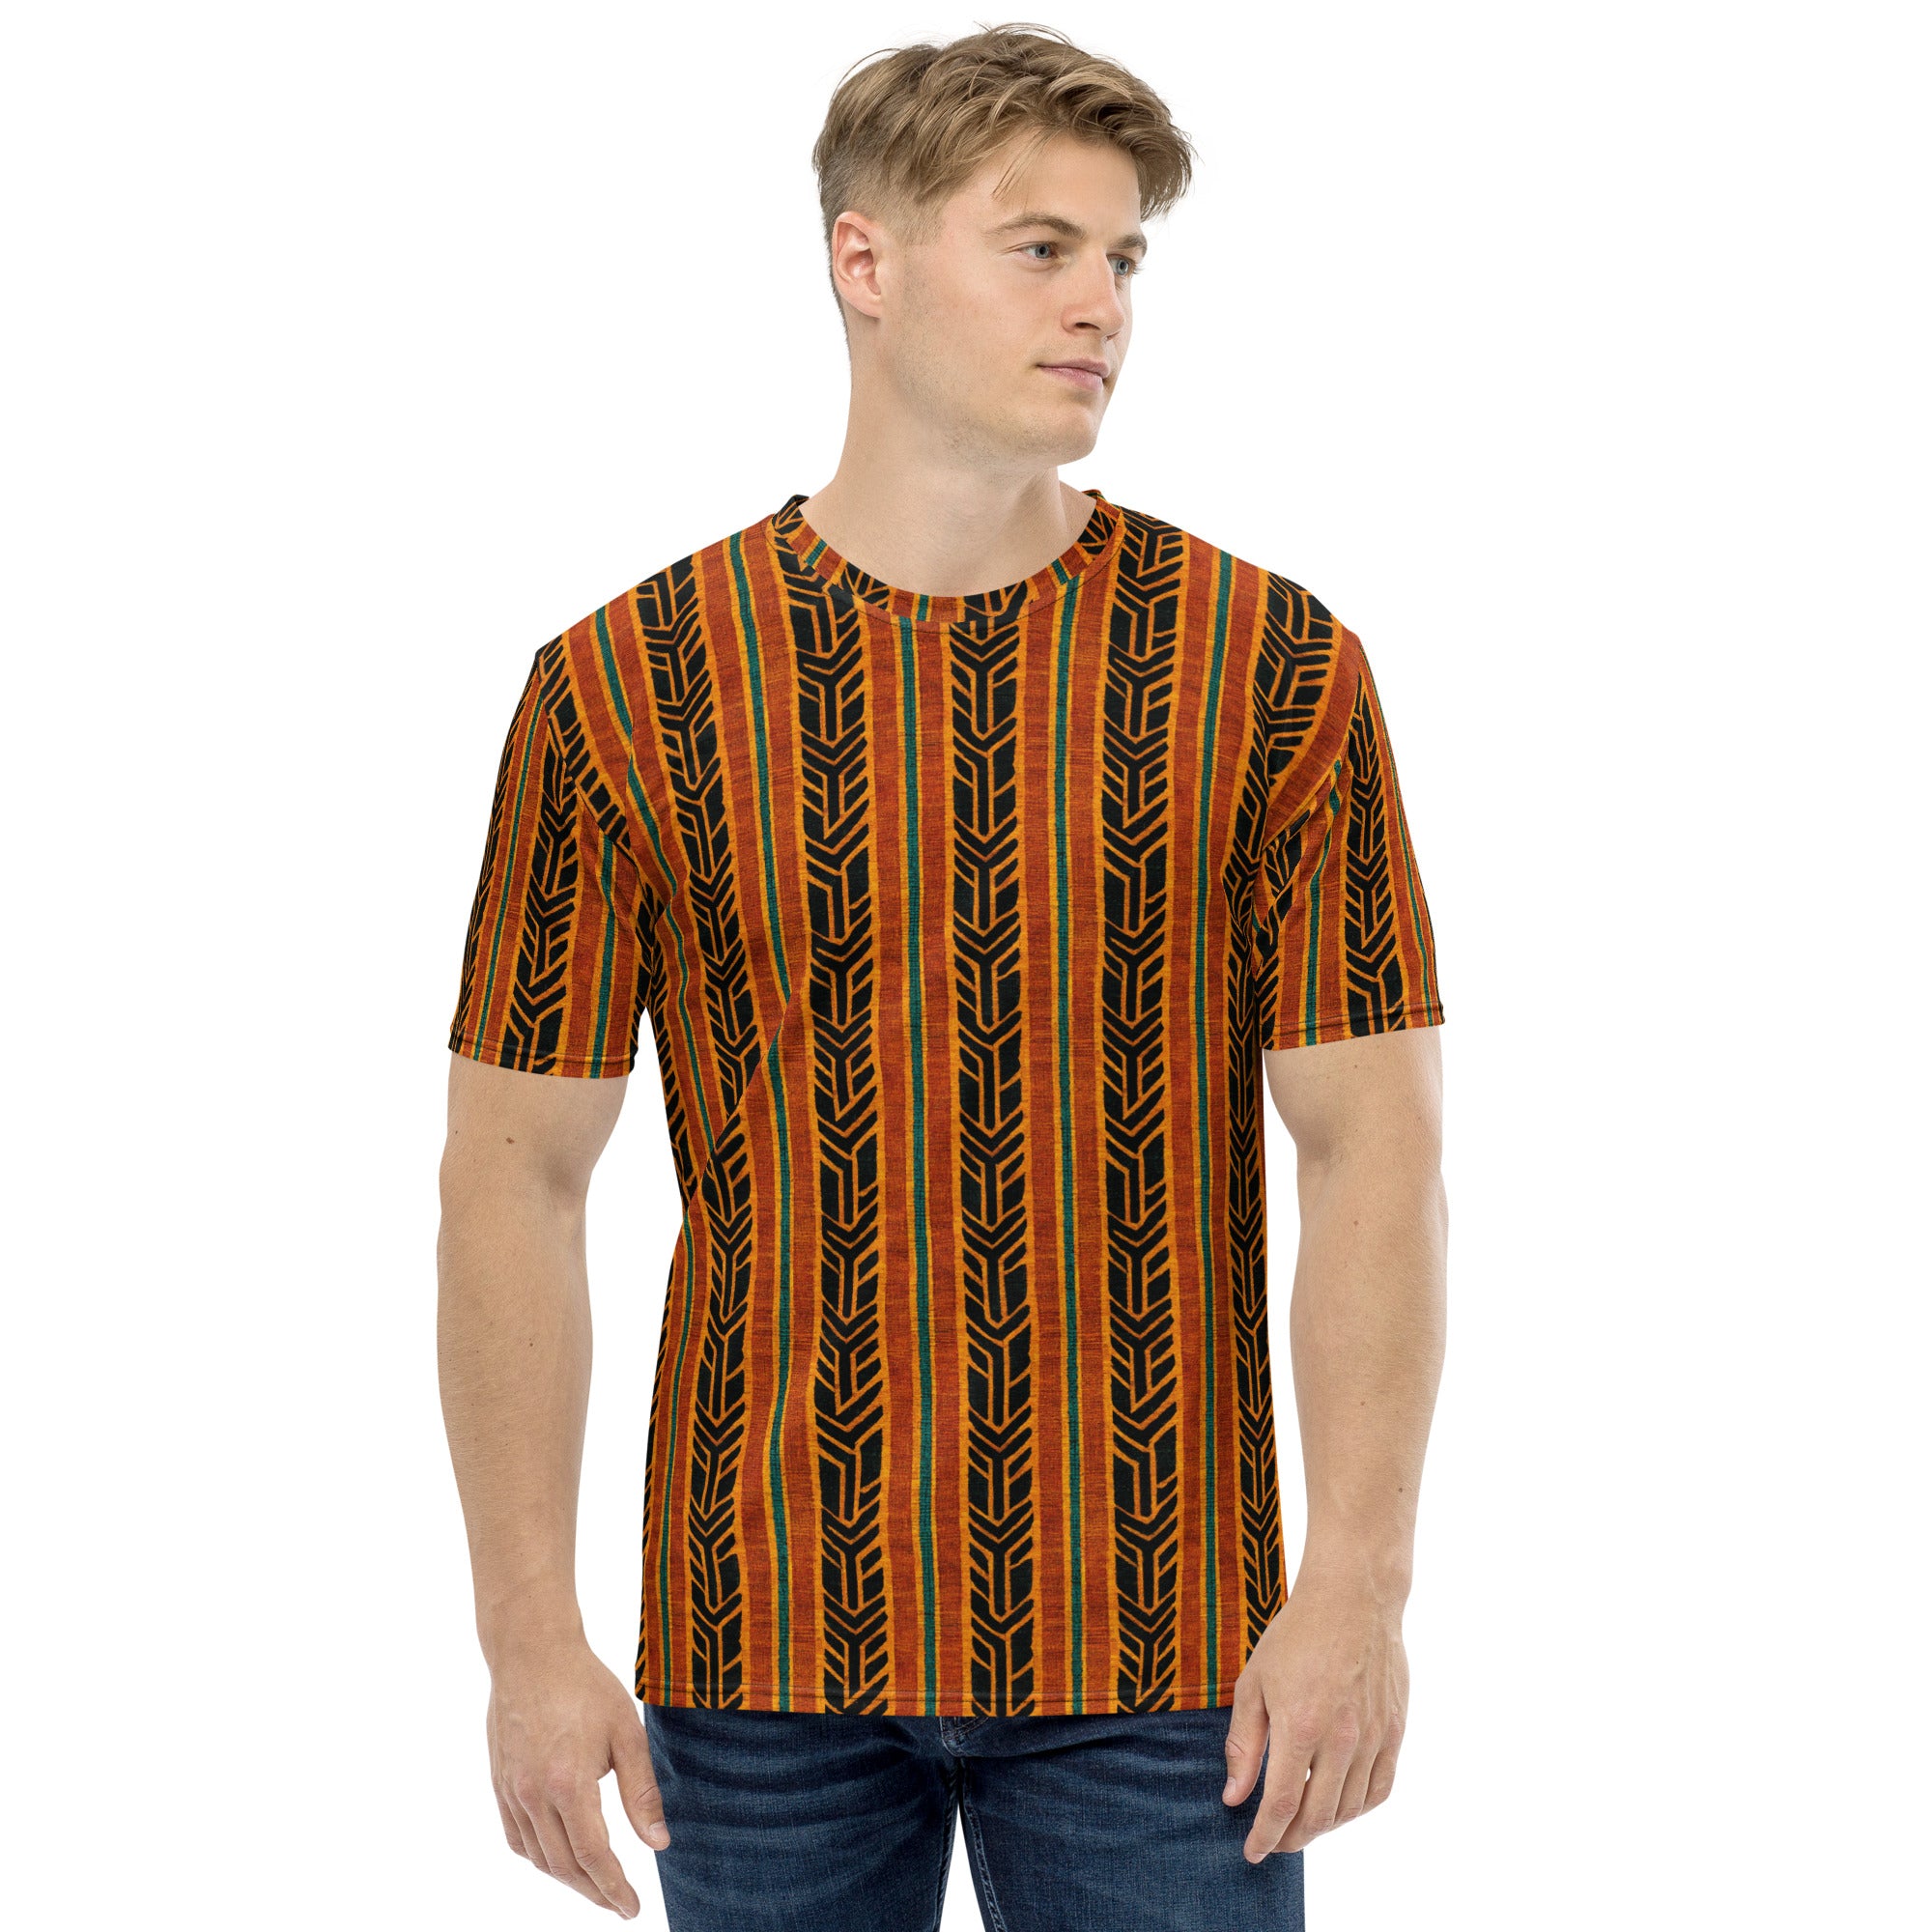 Back To Africa Men's T-Shirt